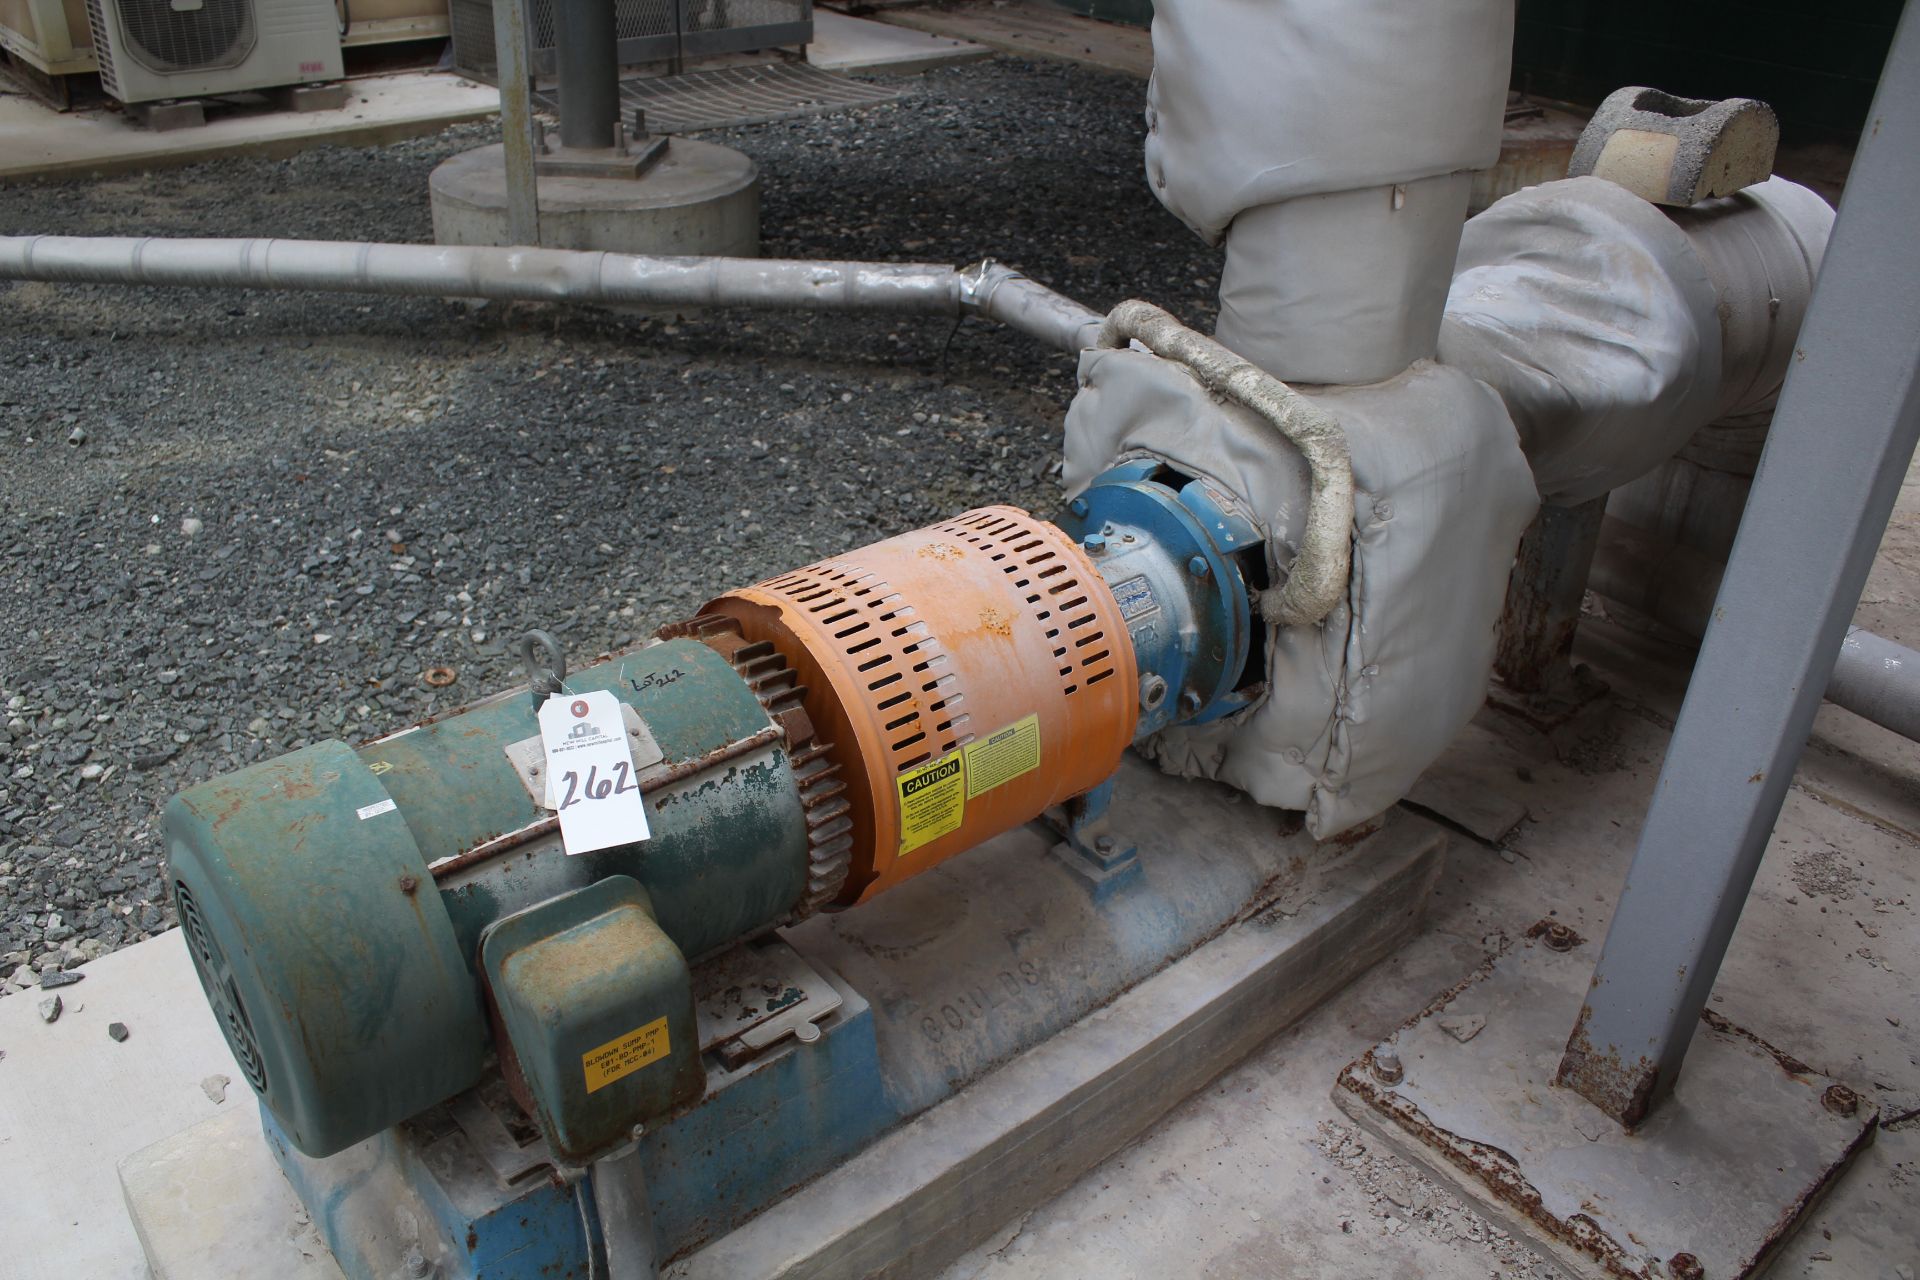 Goulds Pump, M# 3796 w/ Reliance 20 HP Motor | Rig Fee: $150